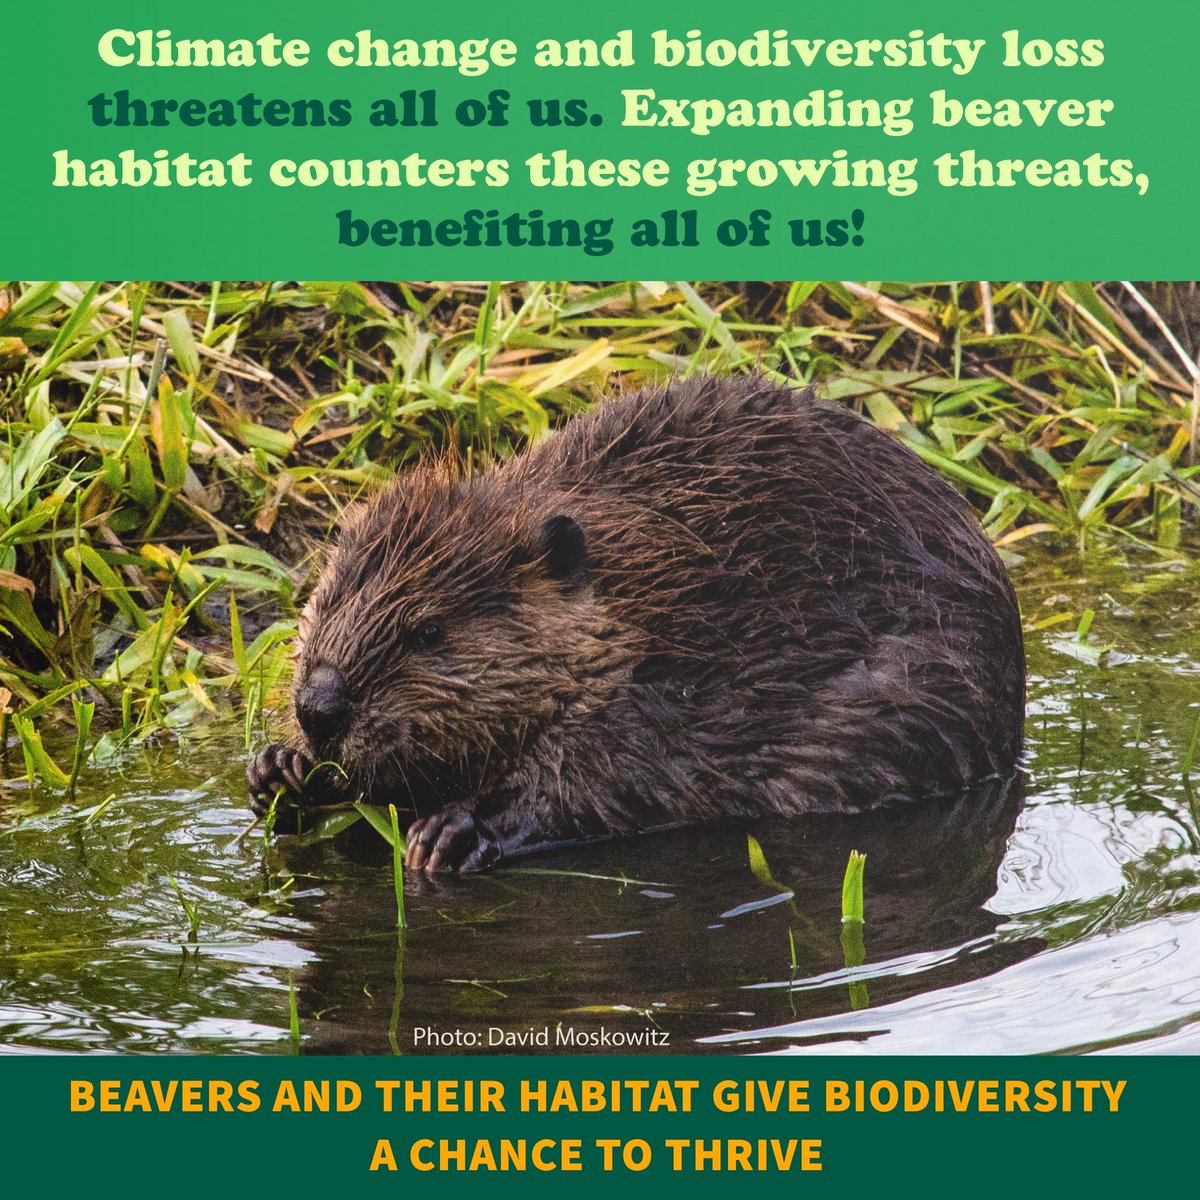 On February 27, 2023 Protect Our Wildlife signed onto a letter to President Biden asking that federally managed public lands be closed to beaver hunting and trapping. 

You can take action by signing and sharing this petition today! 

change.org/p/ask-presiden…

#ProtectBeavers